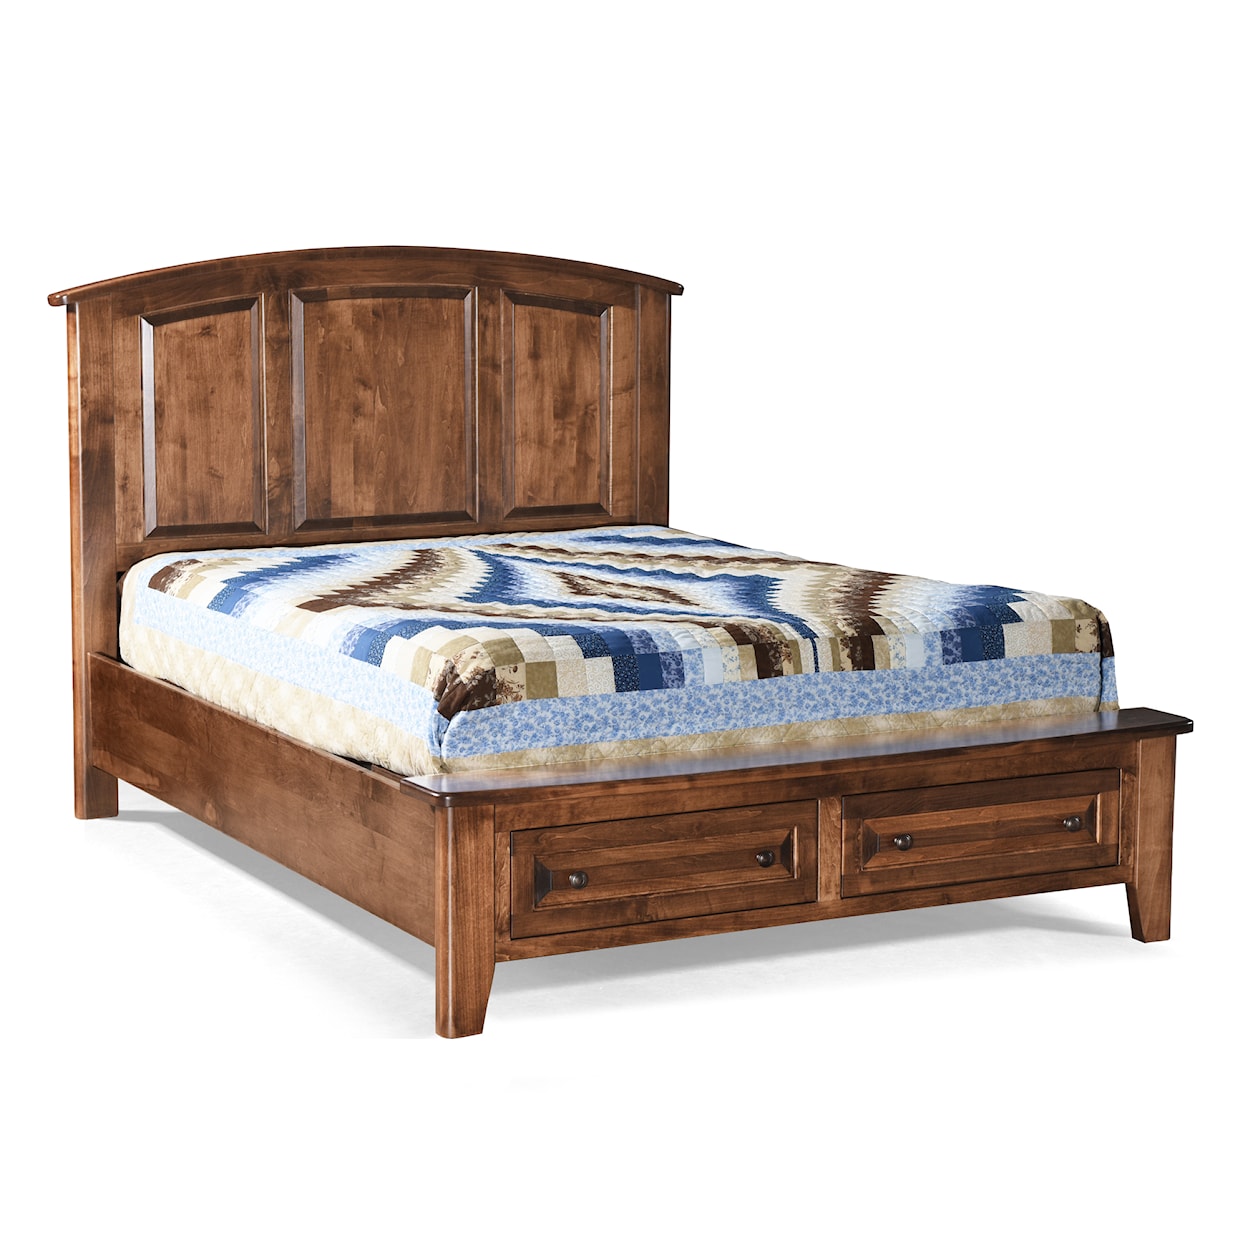 Archbold Furniture Carson King Bed with Footboard Storage